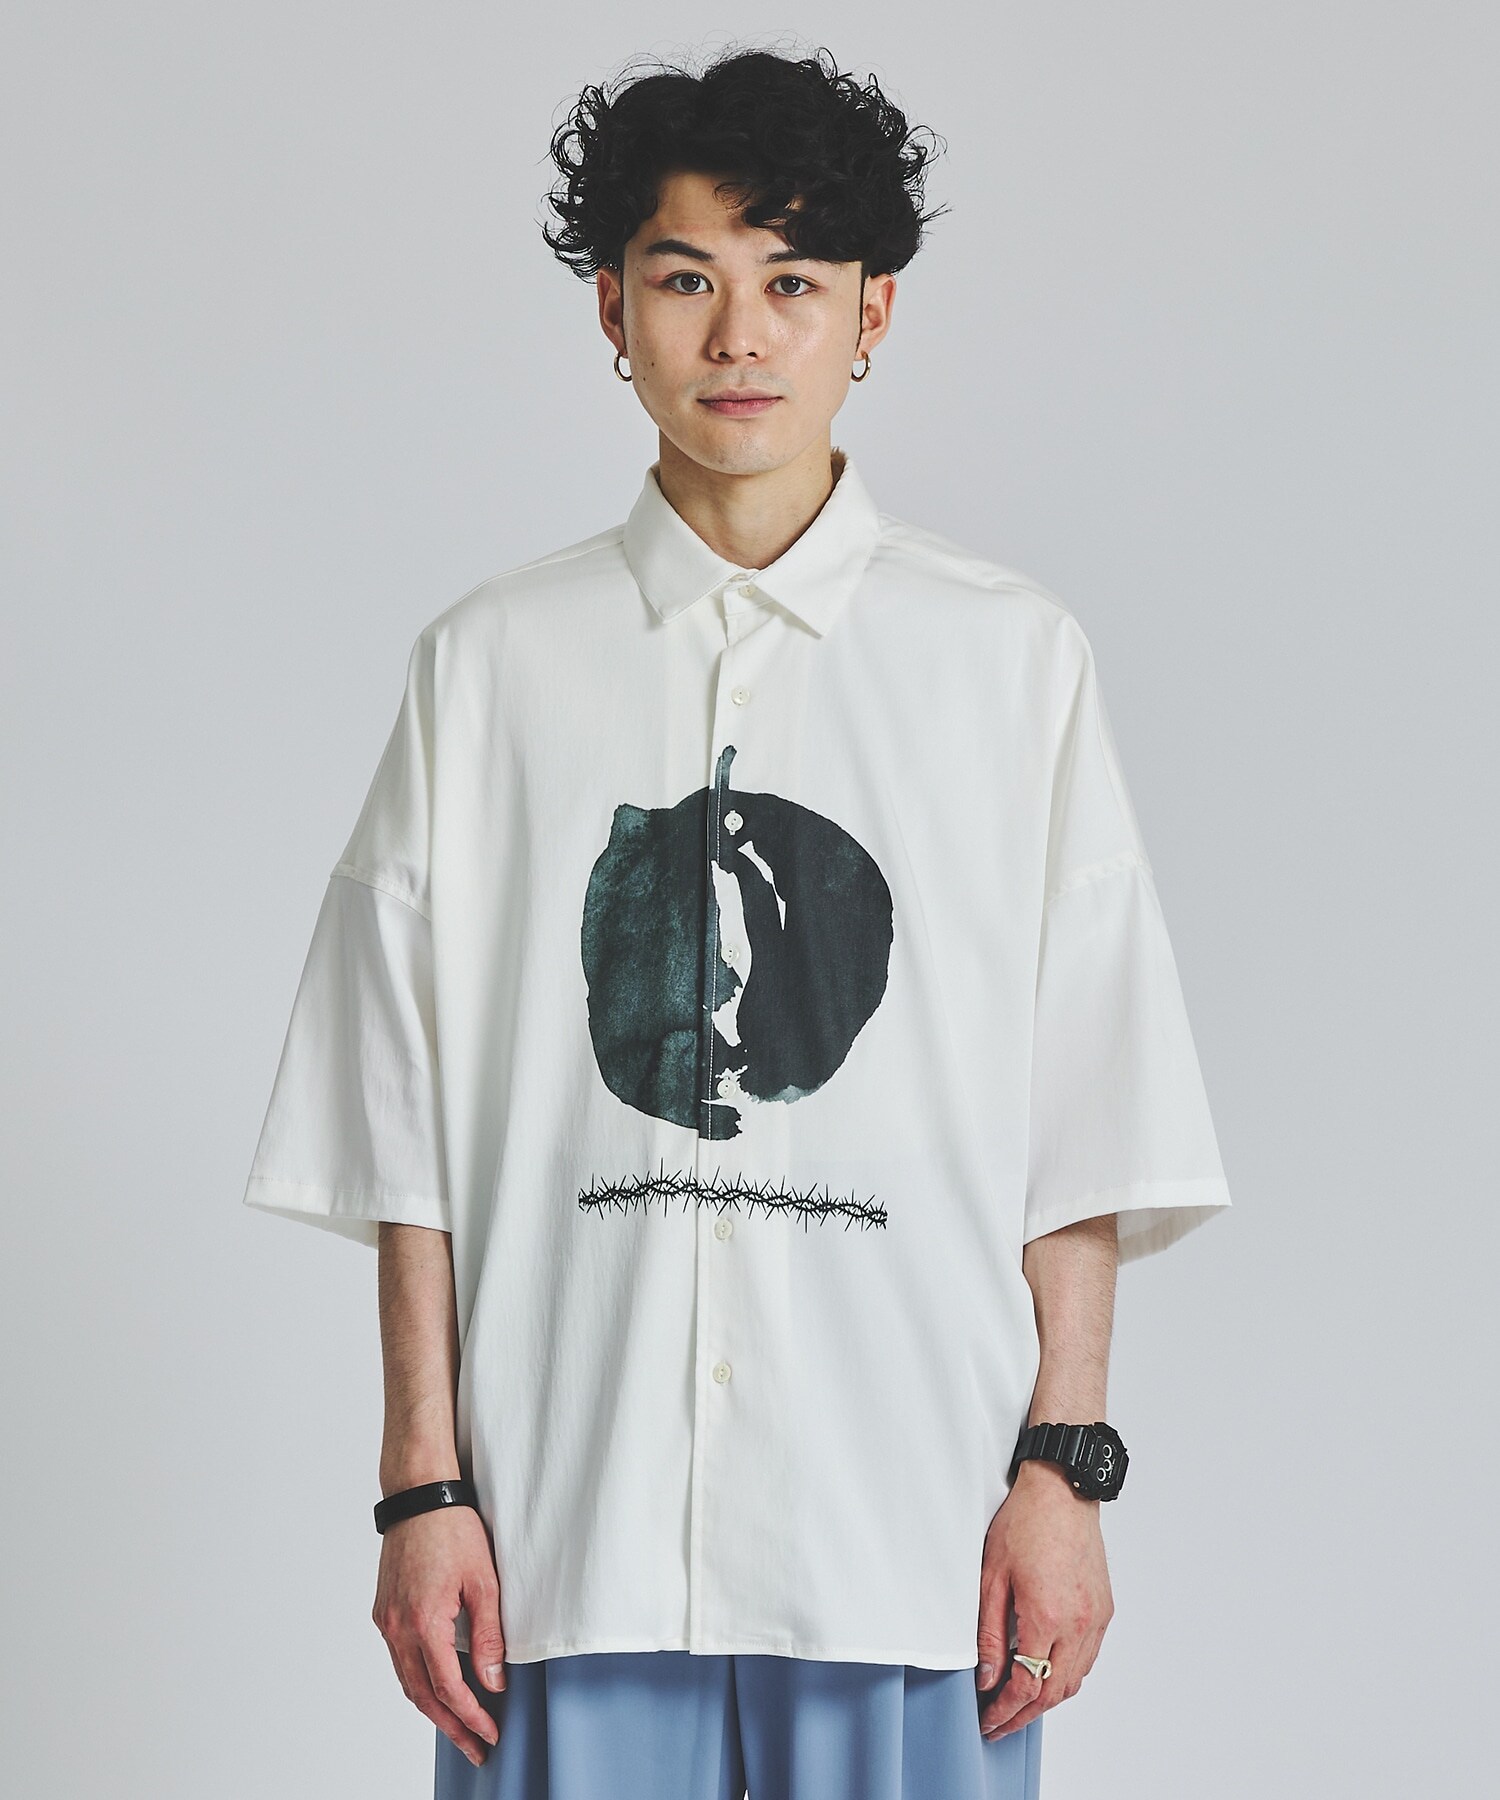 ABSTRACT APPLE S/S SHIRTS